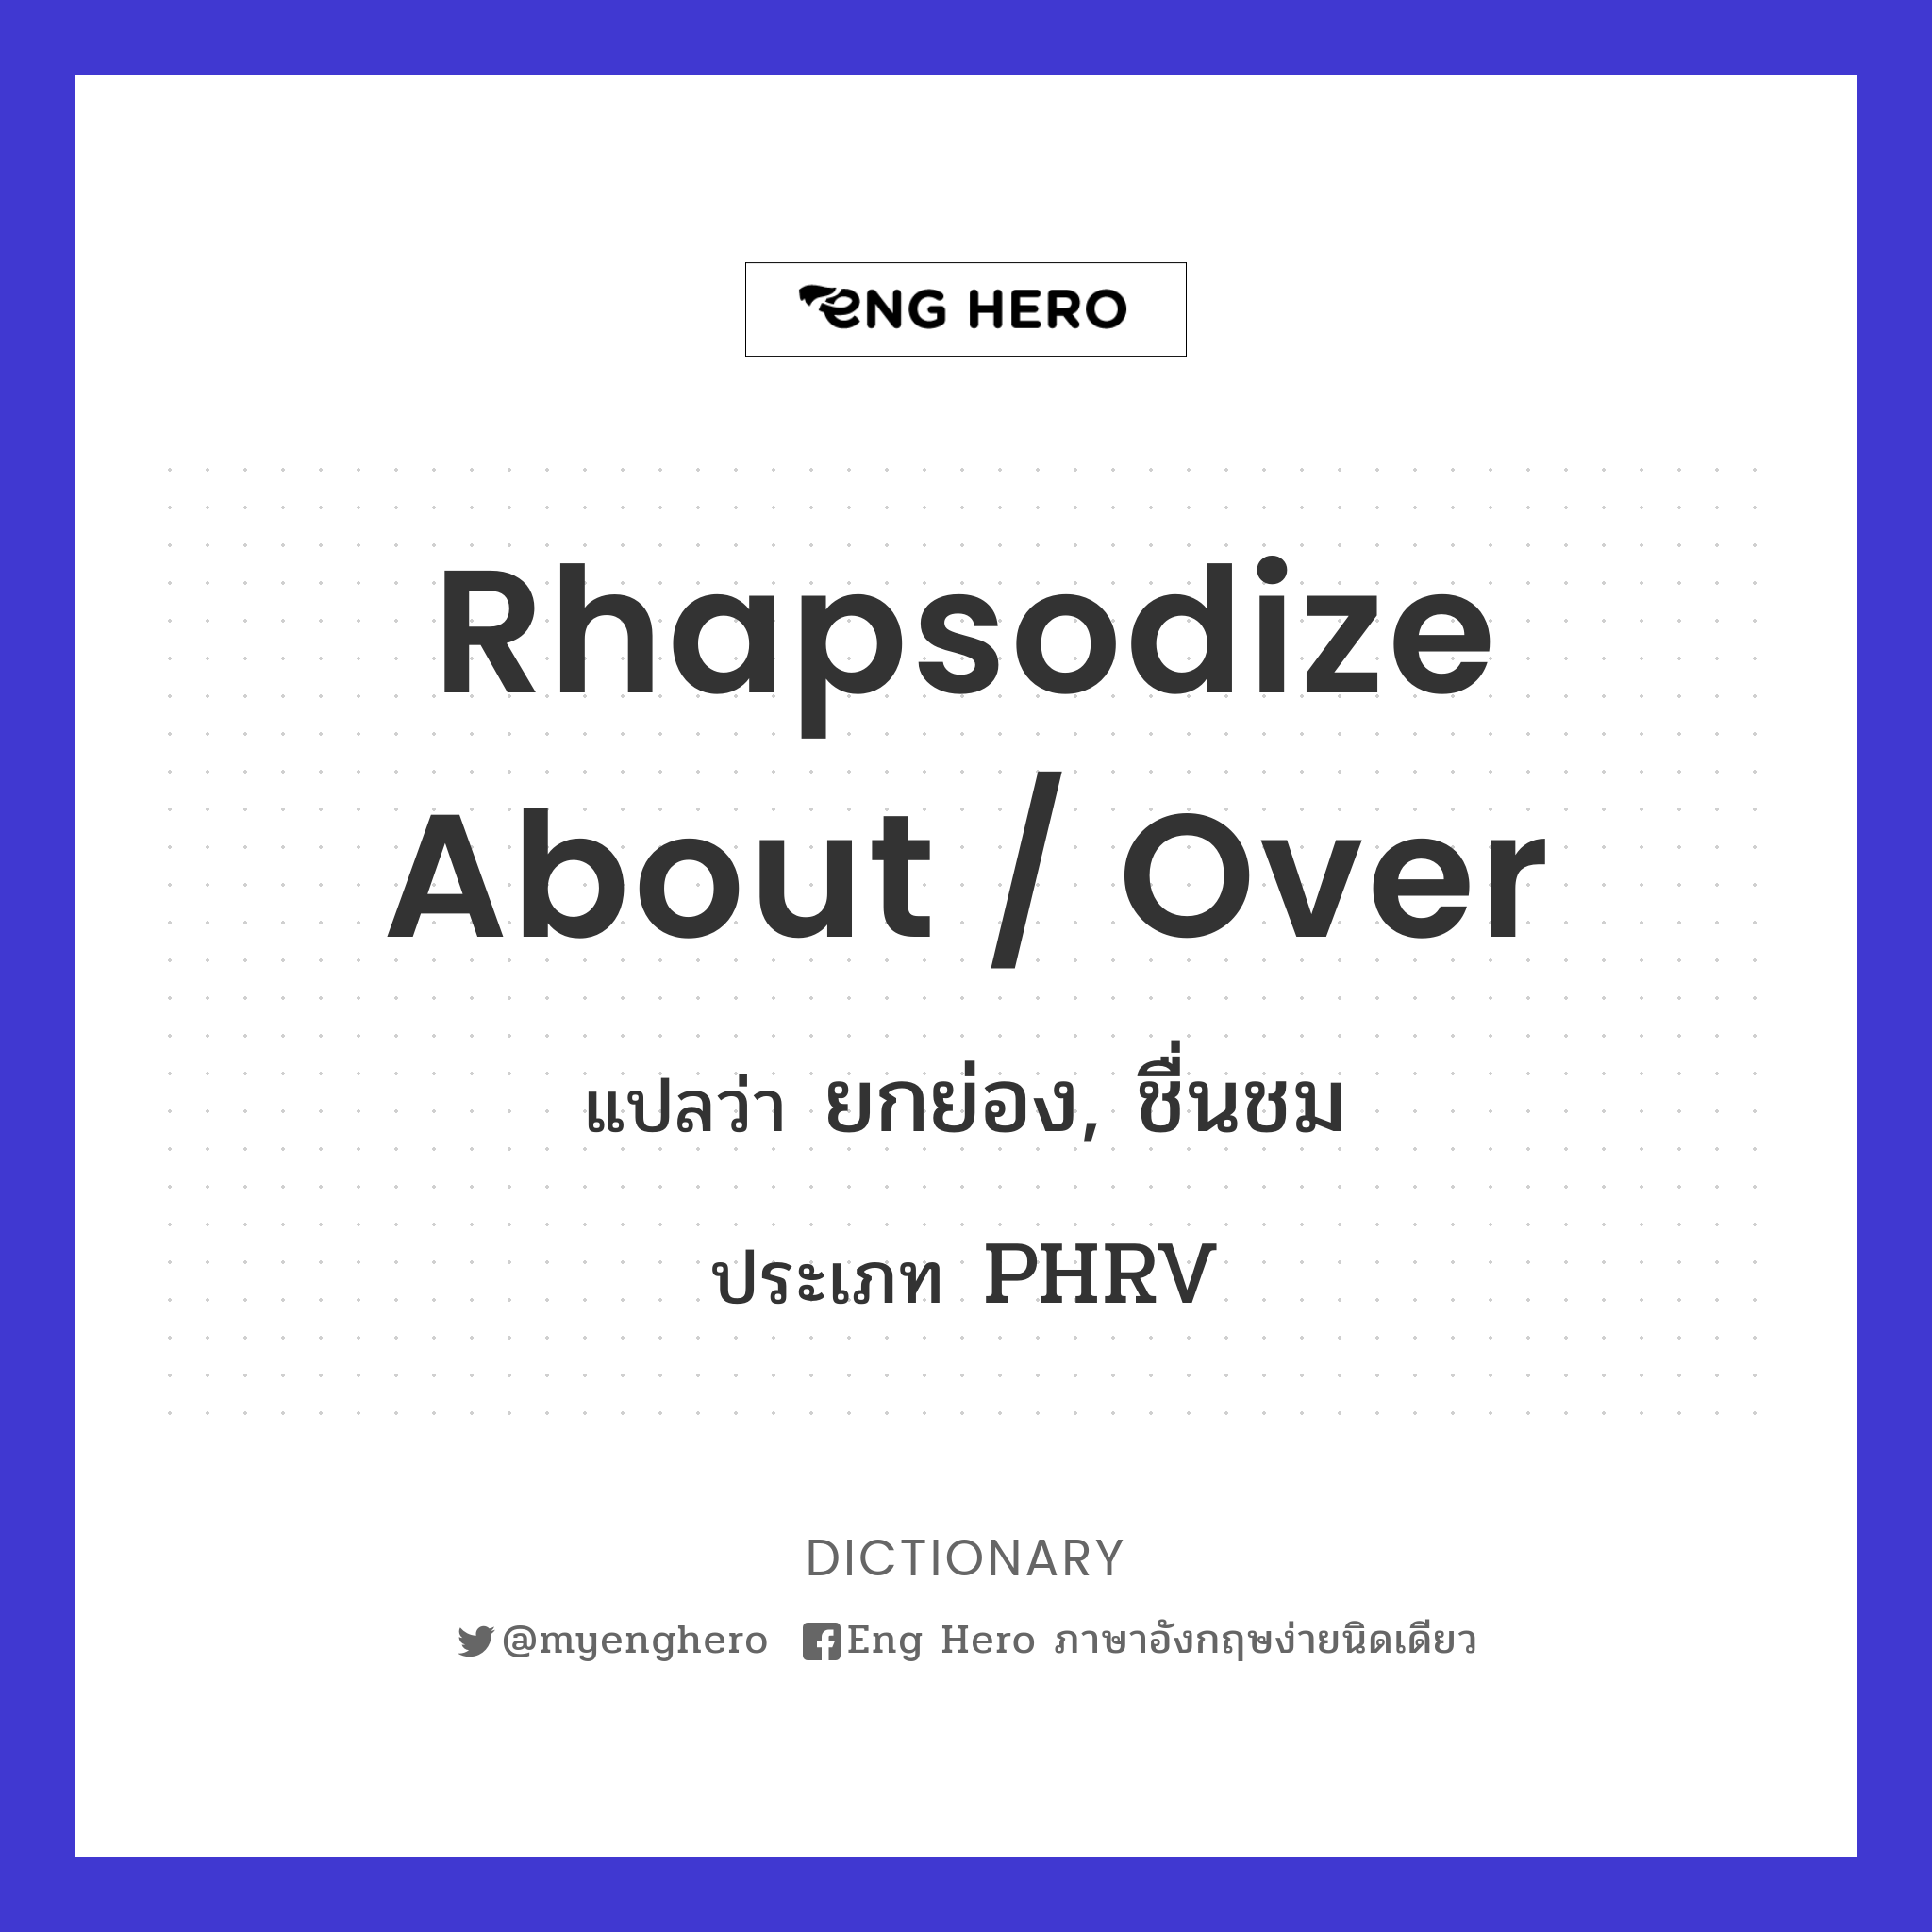 rhapsodize about / over